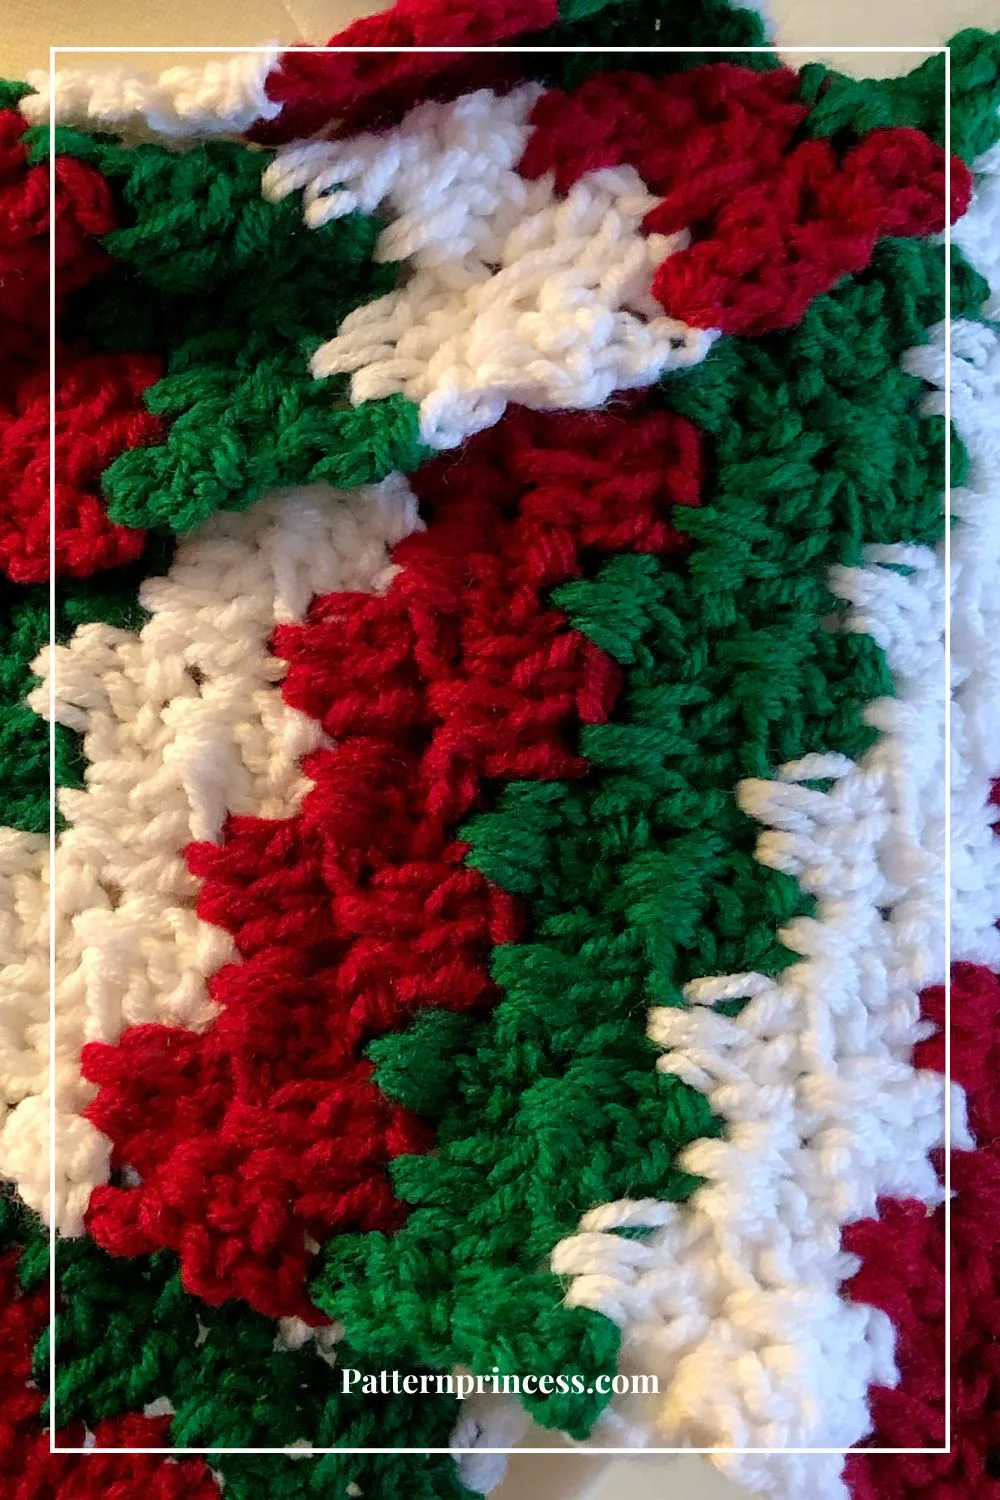 Close up of Crochet Stitch in White Green and Red